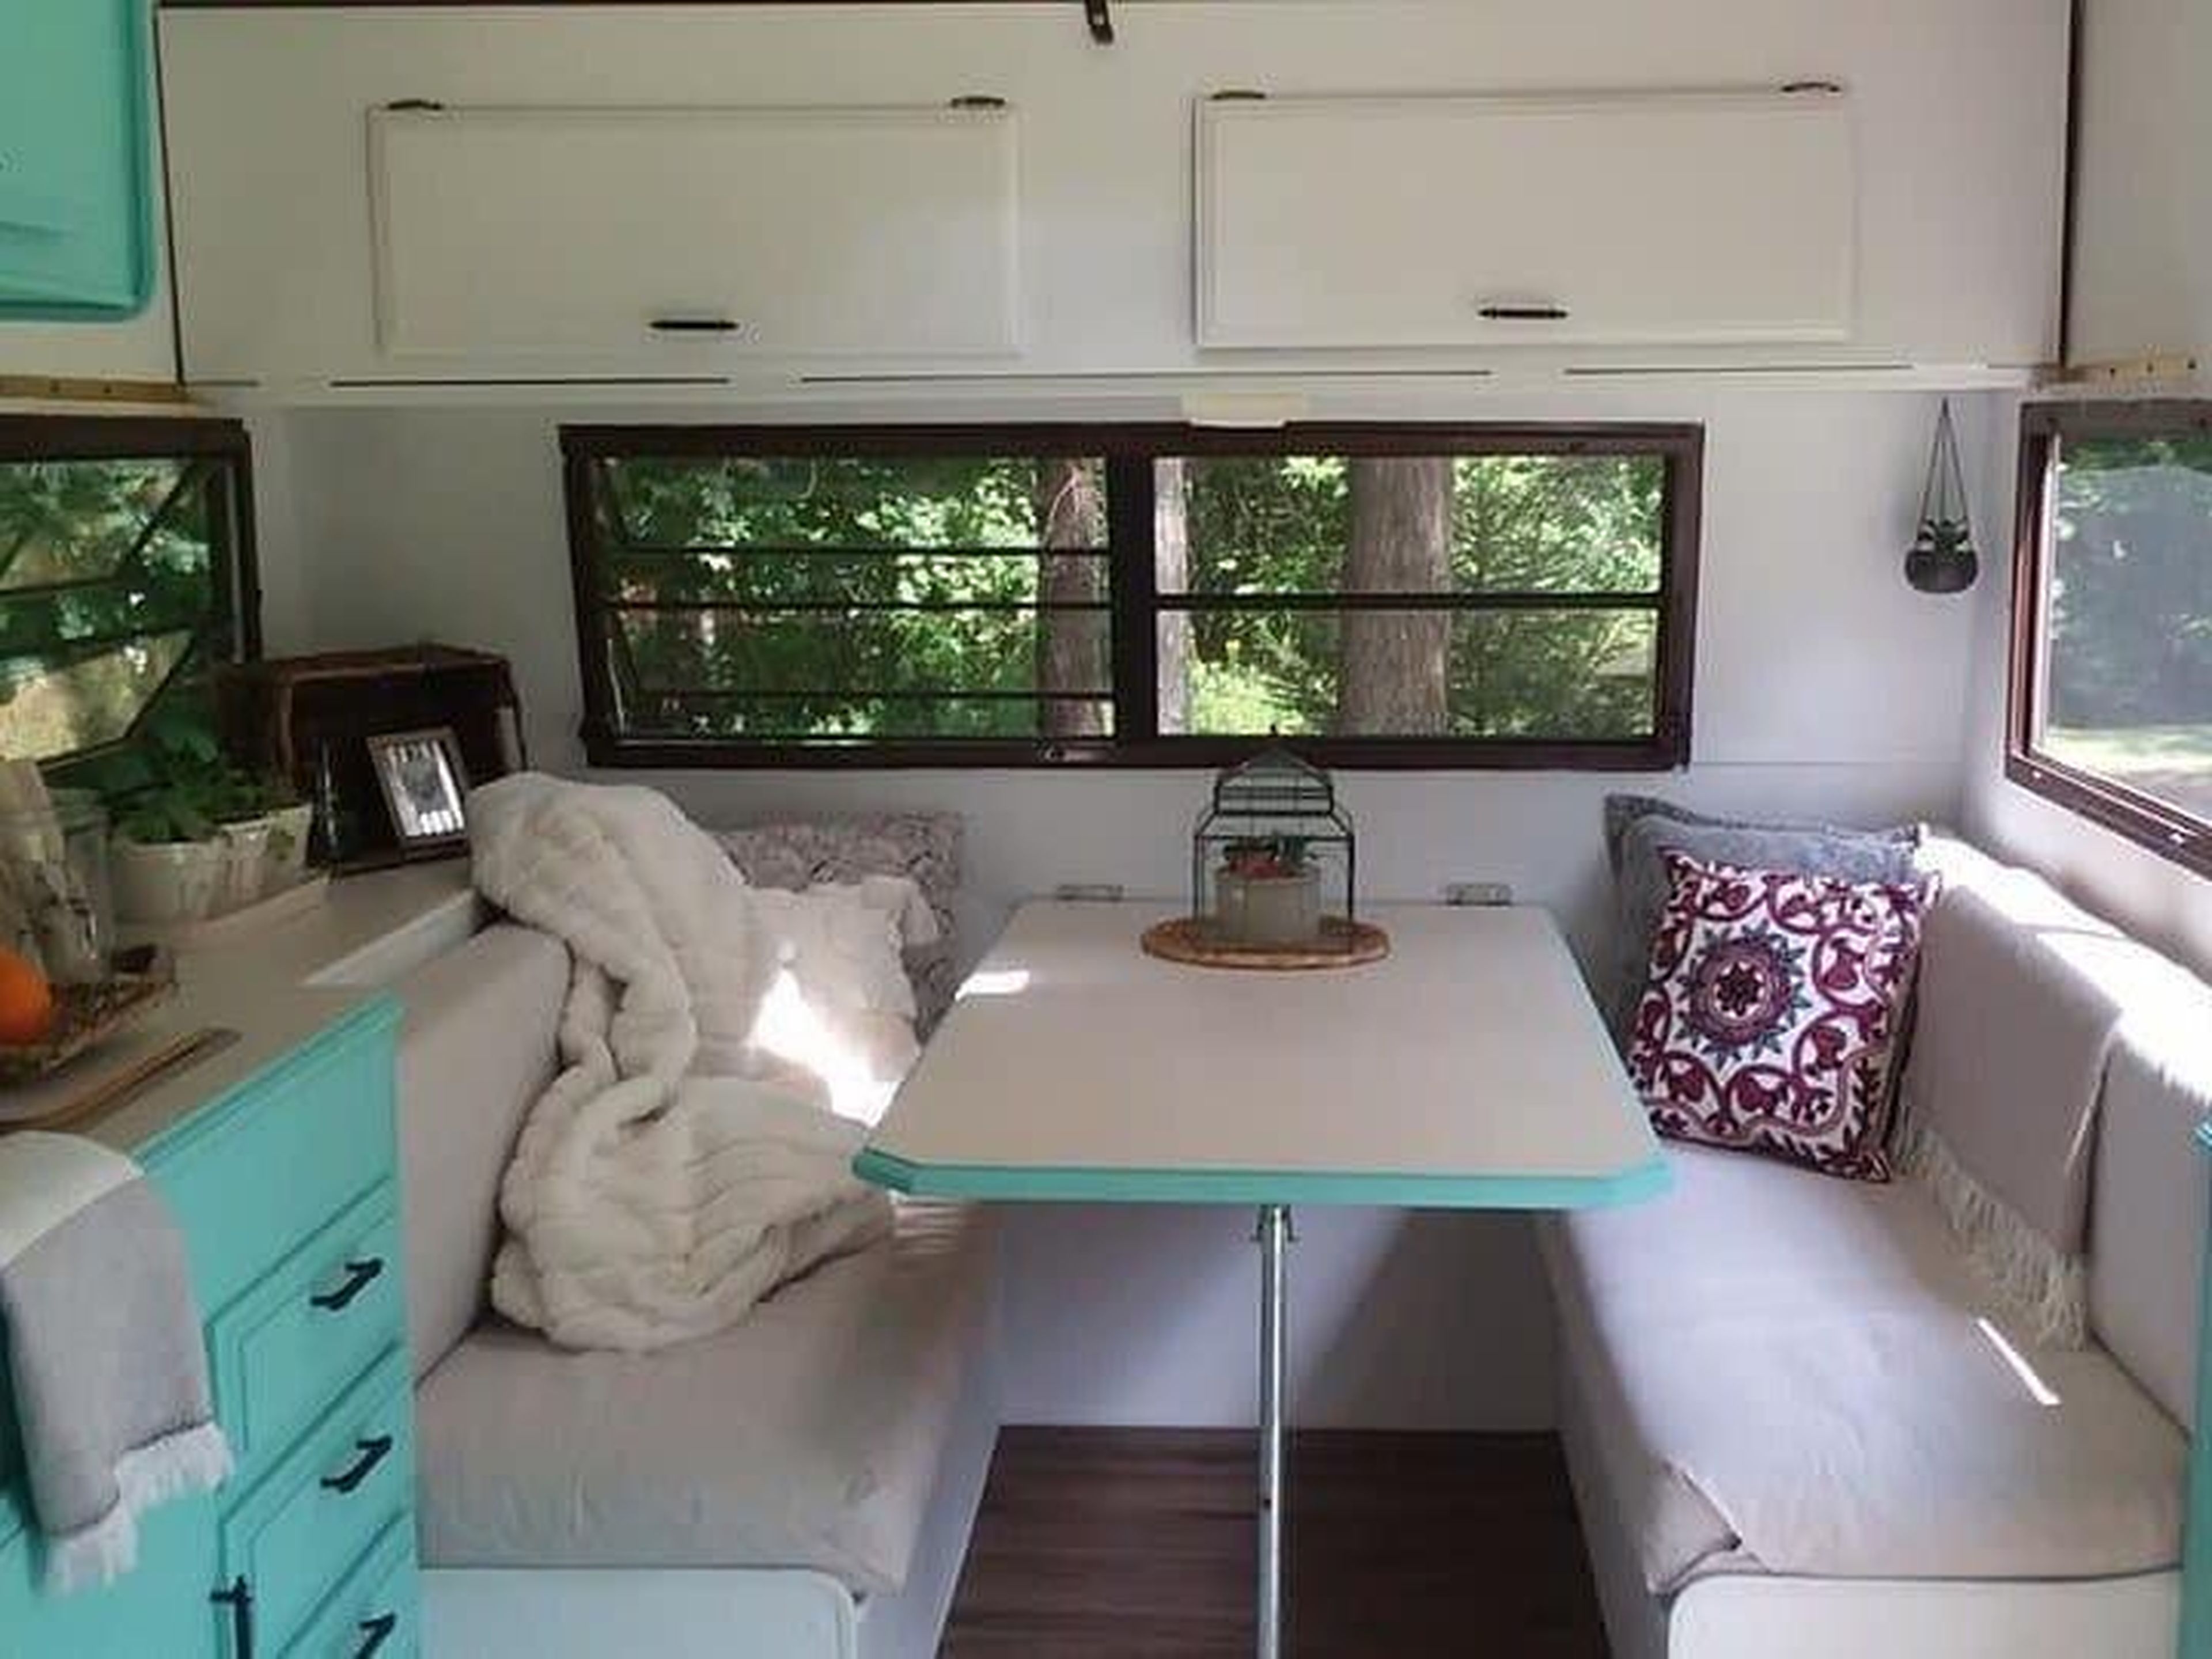 The renovated camper. Courtesy of Aimee Nelson